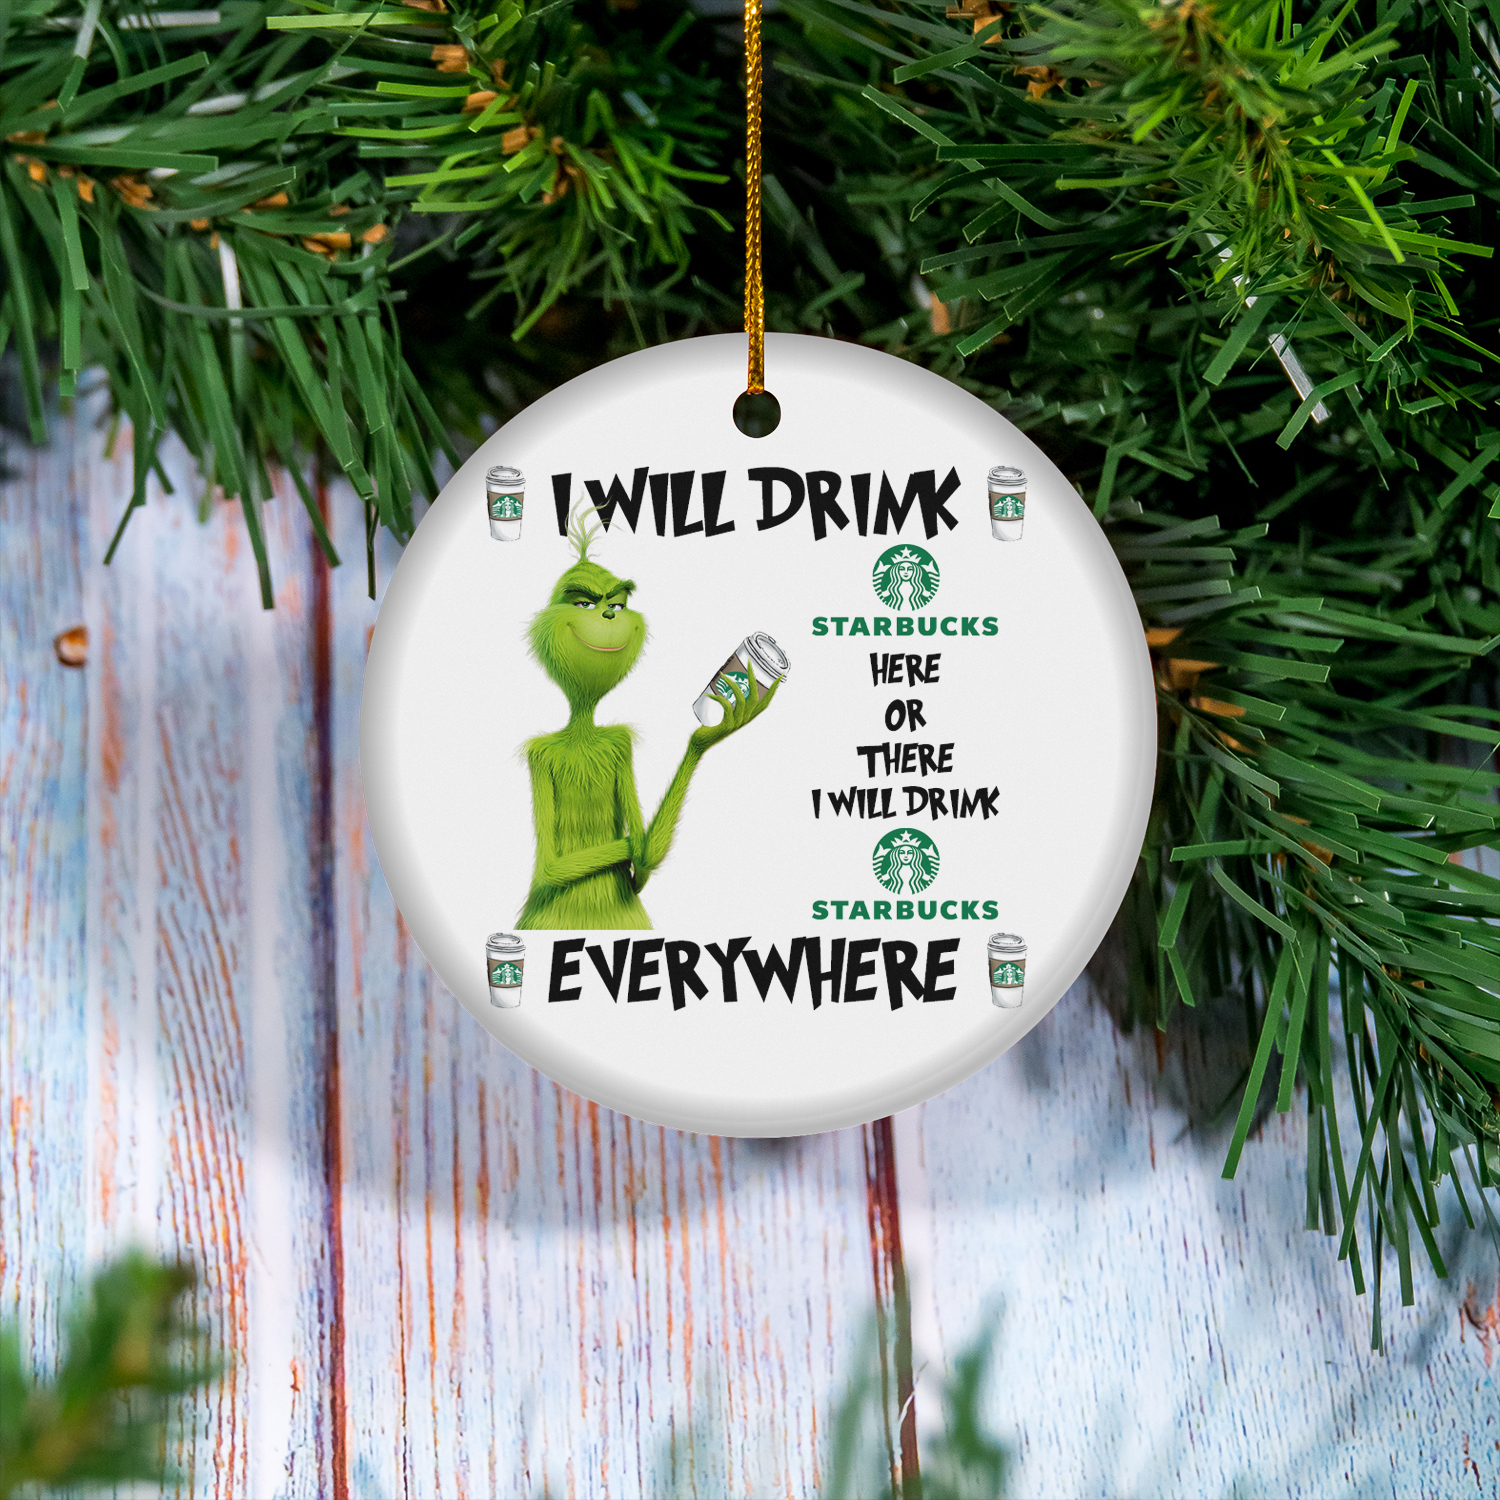 https://newagetee.com/wp-content/uploads/2020/11/Grinch-I-Will-Drink-Starbucks-Here-And-There-Everywhere-Christmas-Ornament.jpg